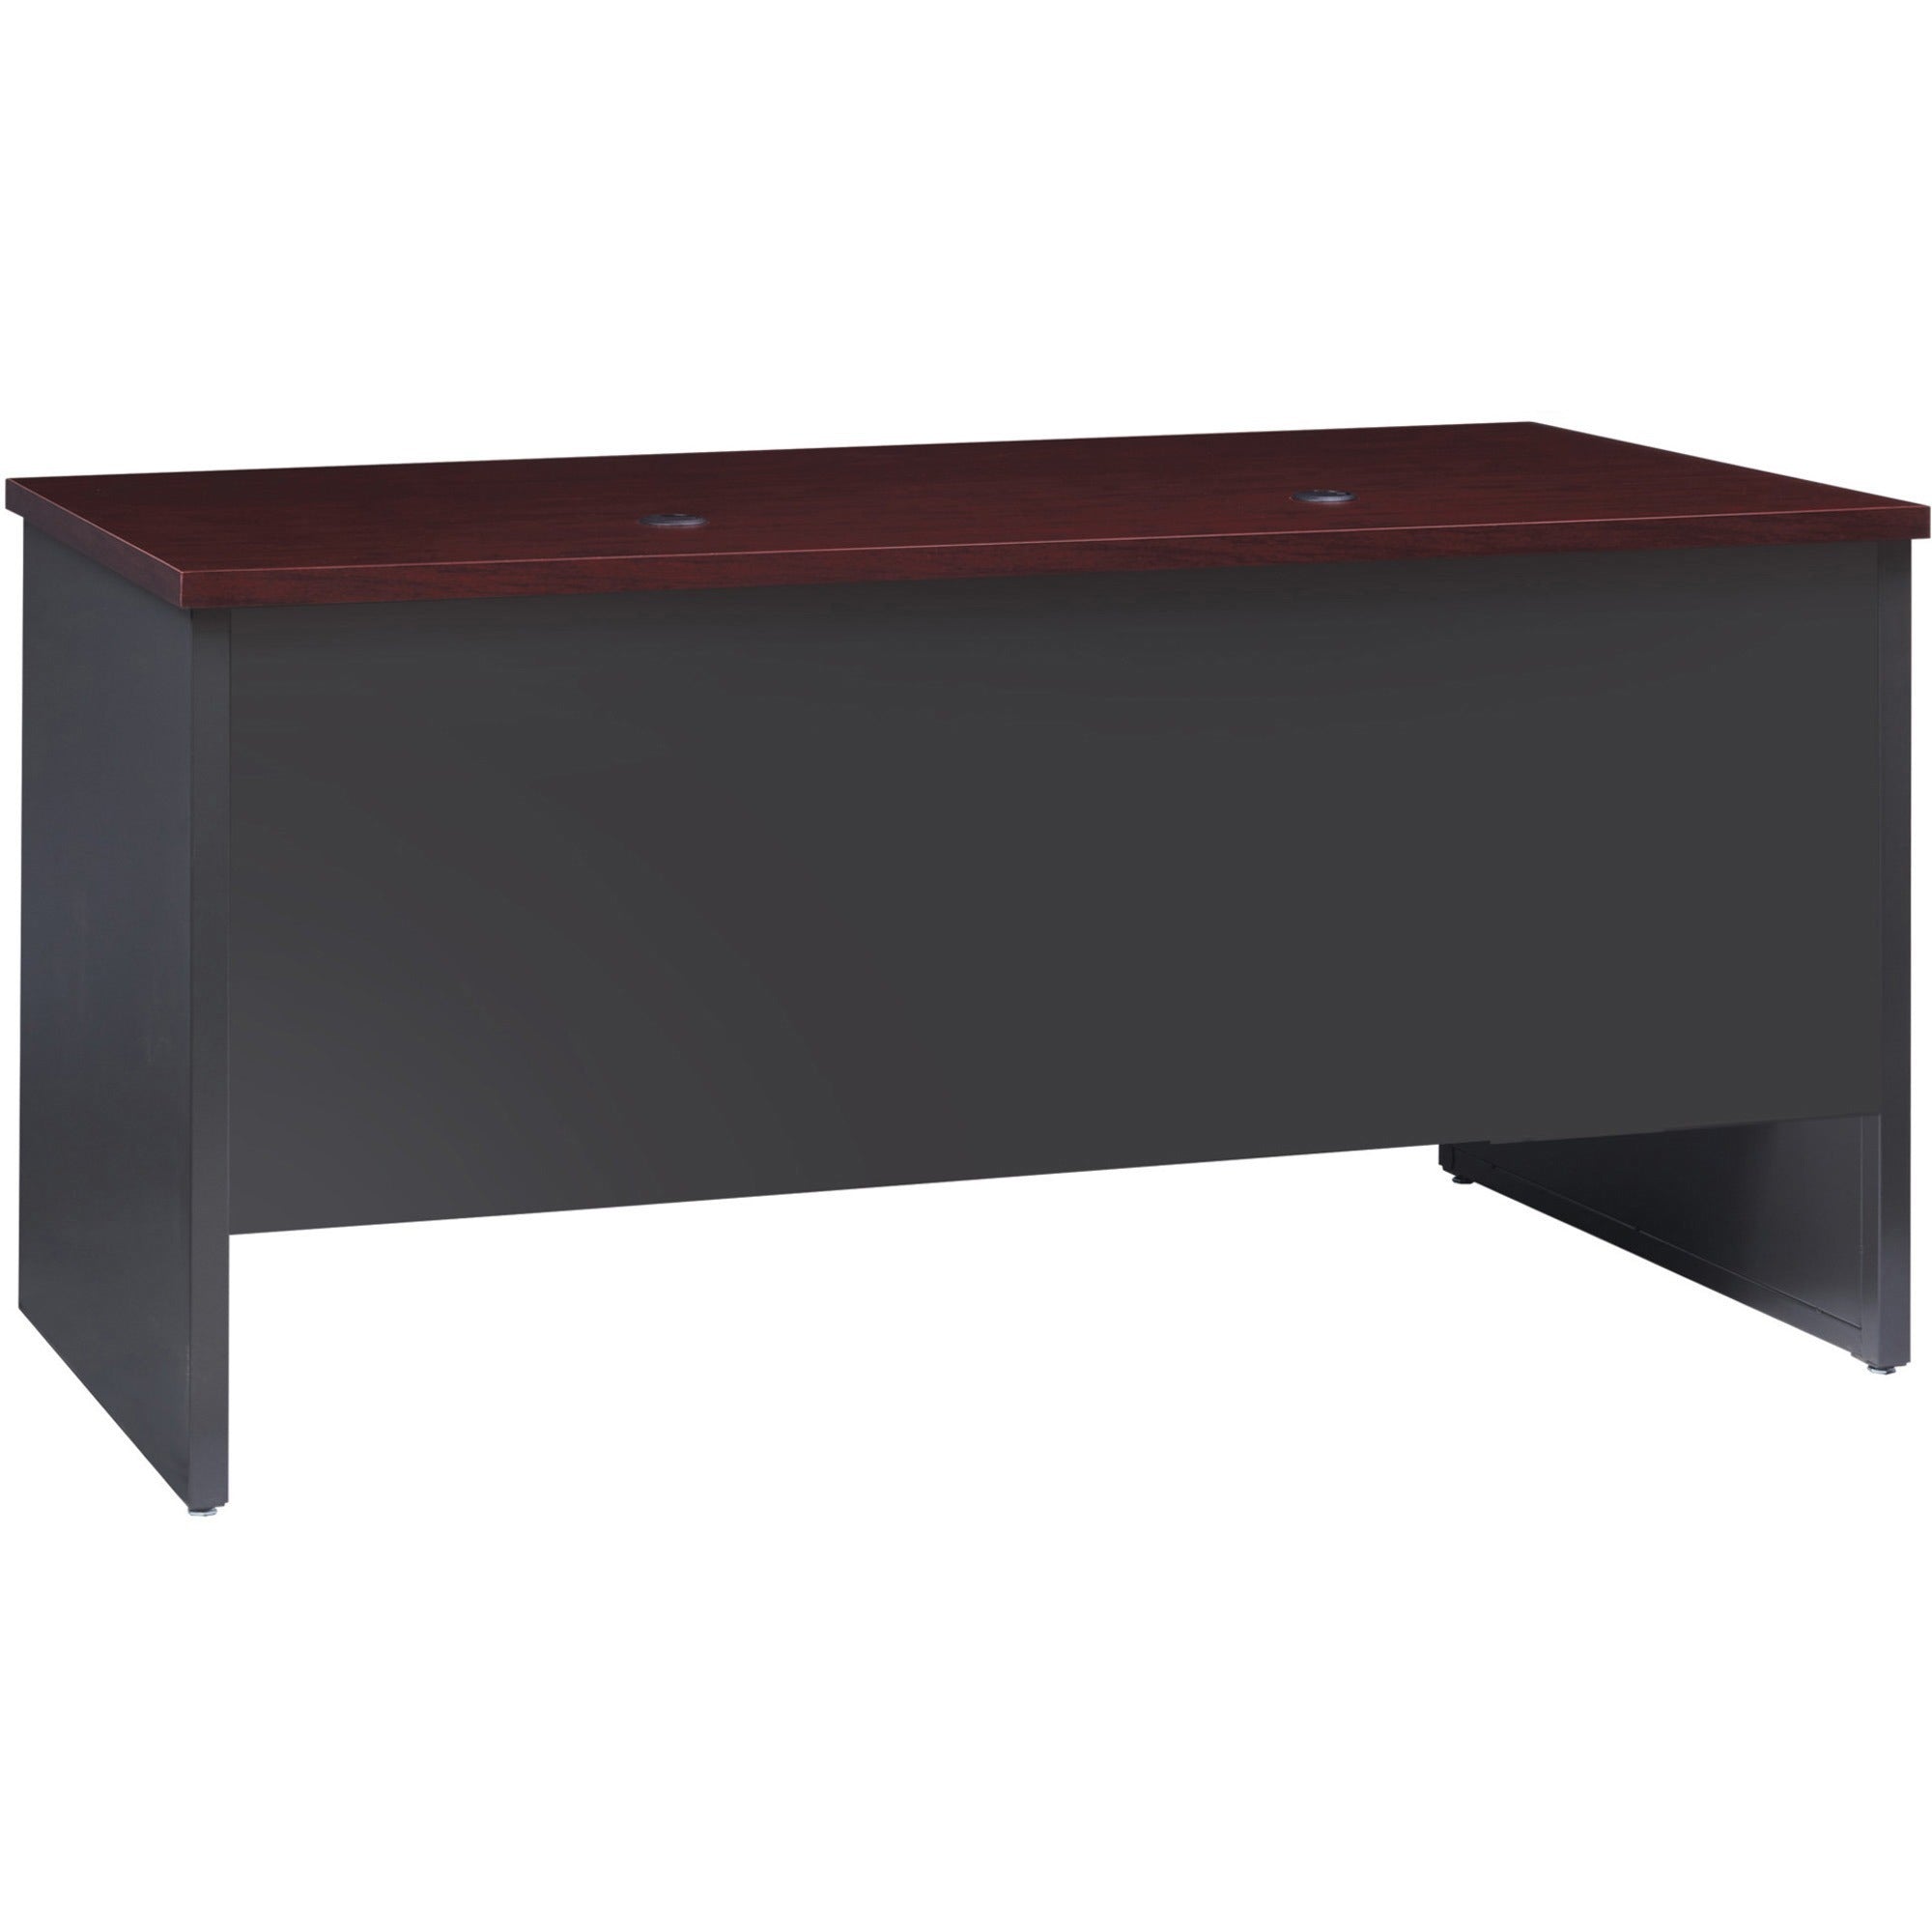 Lorell Fortress Modular Series Double-Pedestal Desk - 60" x 30" , 1.1" Top - 2 x Box, File Drawer(s) - Double Pedestal - Material: Steel - Finish: Mahogany Laminate, Charcoal - Scratch Resistant, Stain Resistant, Ball-bearing Suspension, Grommet, Han - 